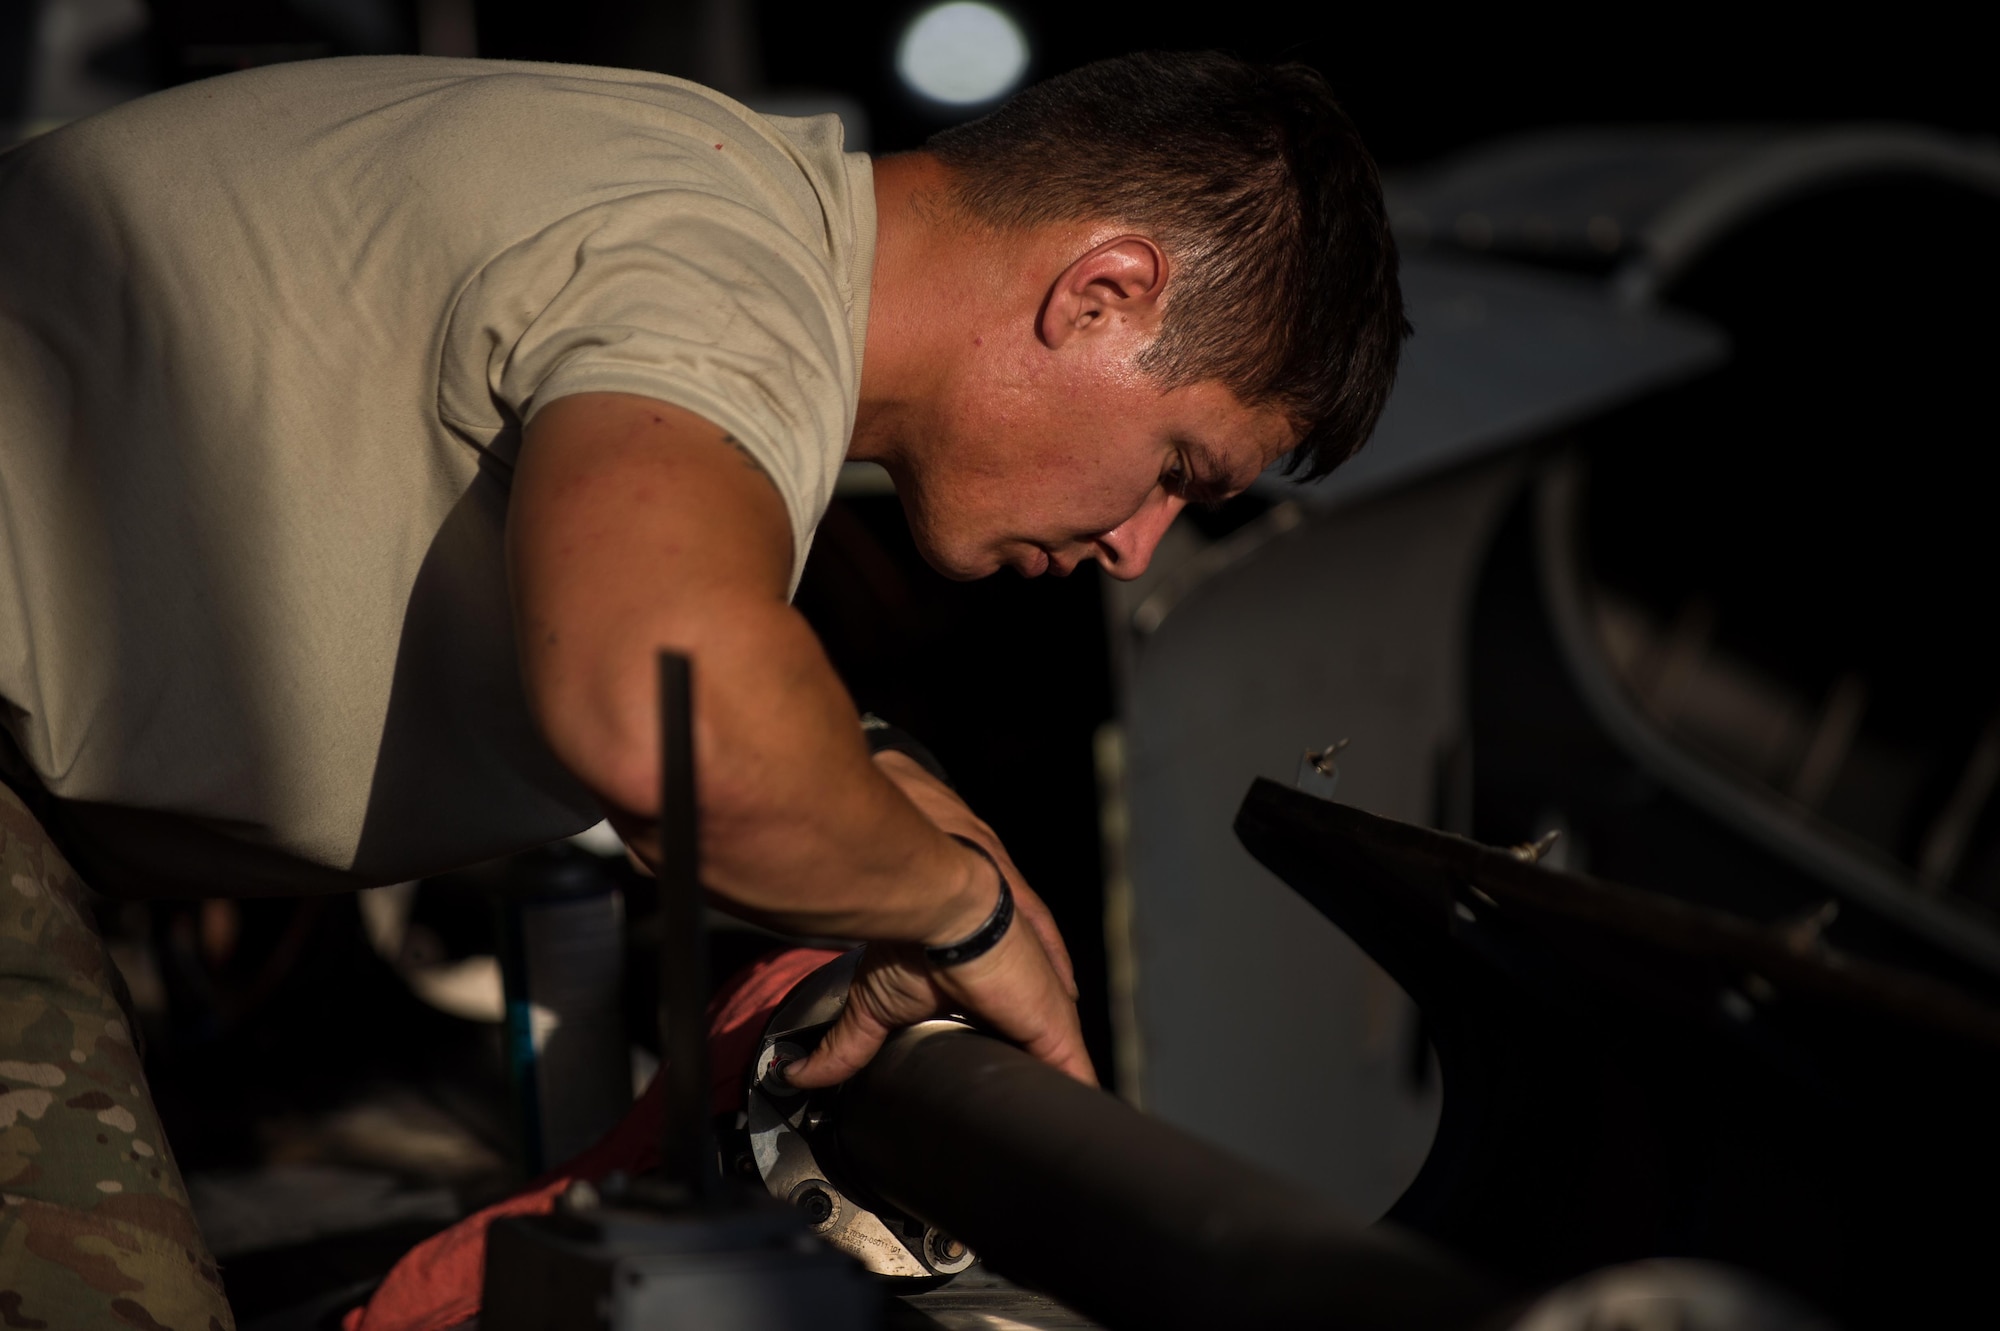 Staff Sgt. Michael Morris, a 41st Expeditionary Helicopter Maintenance Unit HH-60 Pave Hawk crew chief, completes a 50-hour inspection on a Pave Hawk at Bagram Airfield, Afghanistan, June 28, 2015. The 41st EHMU ensures Pave Hawks on Bagram Airfield are prepared for flight and returned to a mission-ready state once they land. (U.S. Air Force photo/Tech. Sgt. Joseph Swafford)